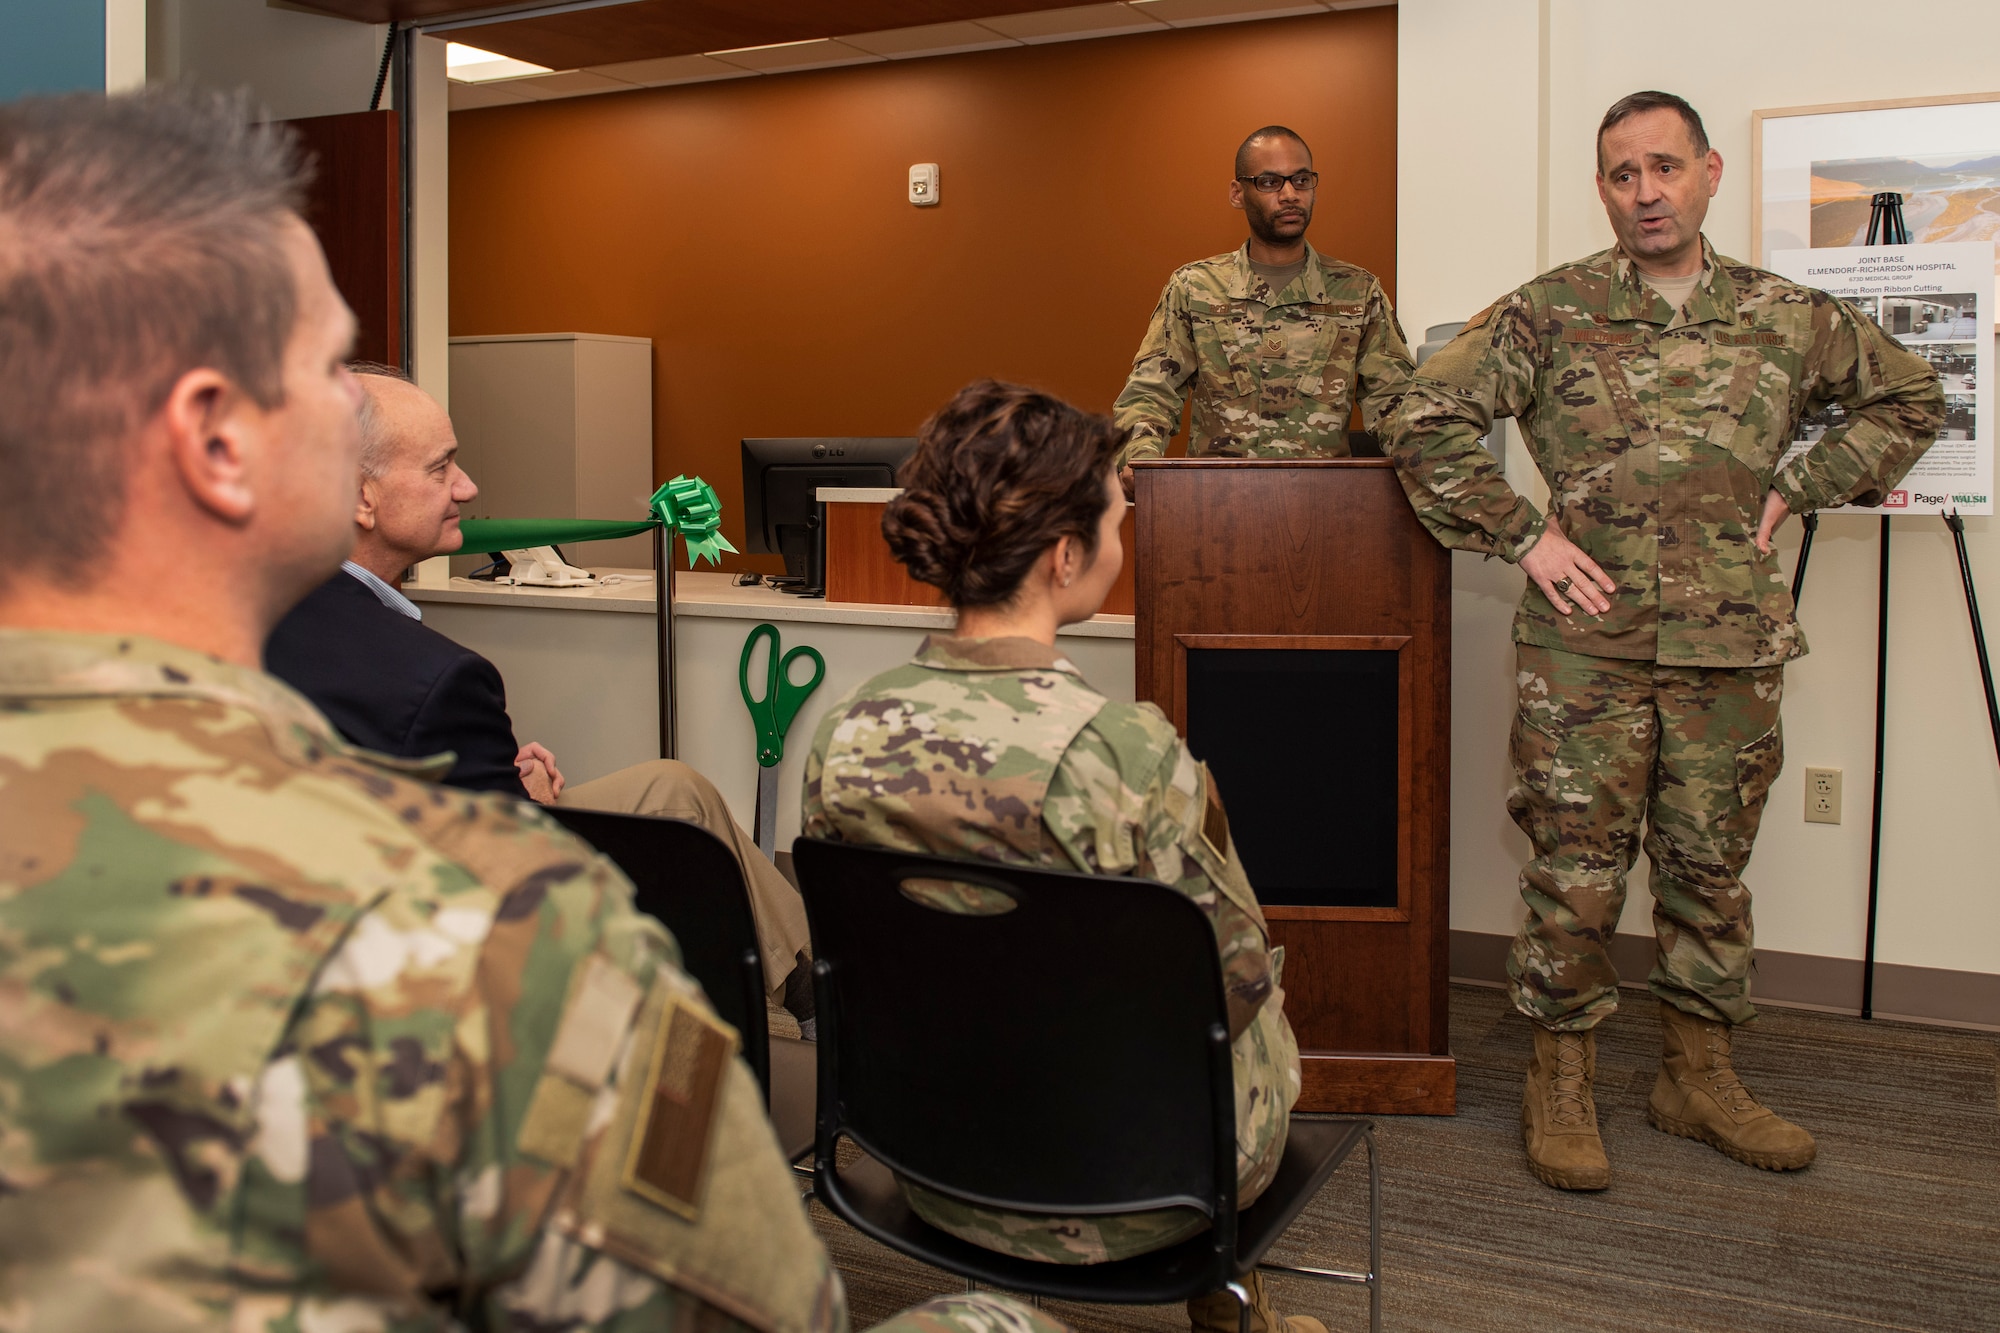 U.S. Air Force Col. Lee D. Williames, 673d Medical Group commander, speaks at a ribbon-cutting ceremony for the new MRI suite in the Joint Base Elmendorf-Richardson hospital on JBER, Alaska, Oct. 28, 2019. The MRI area remodel included the creation of one joint control room, rather than the former two control rooms in separate areas; an upgraded 1.5 Tesla GE scanner; and newer patient amenities like dressing rooms, a reception desk, a waiting area, and murals and lighting in the scanner rooms for patient comfort.